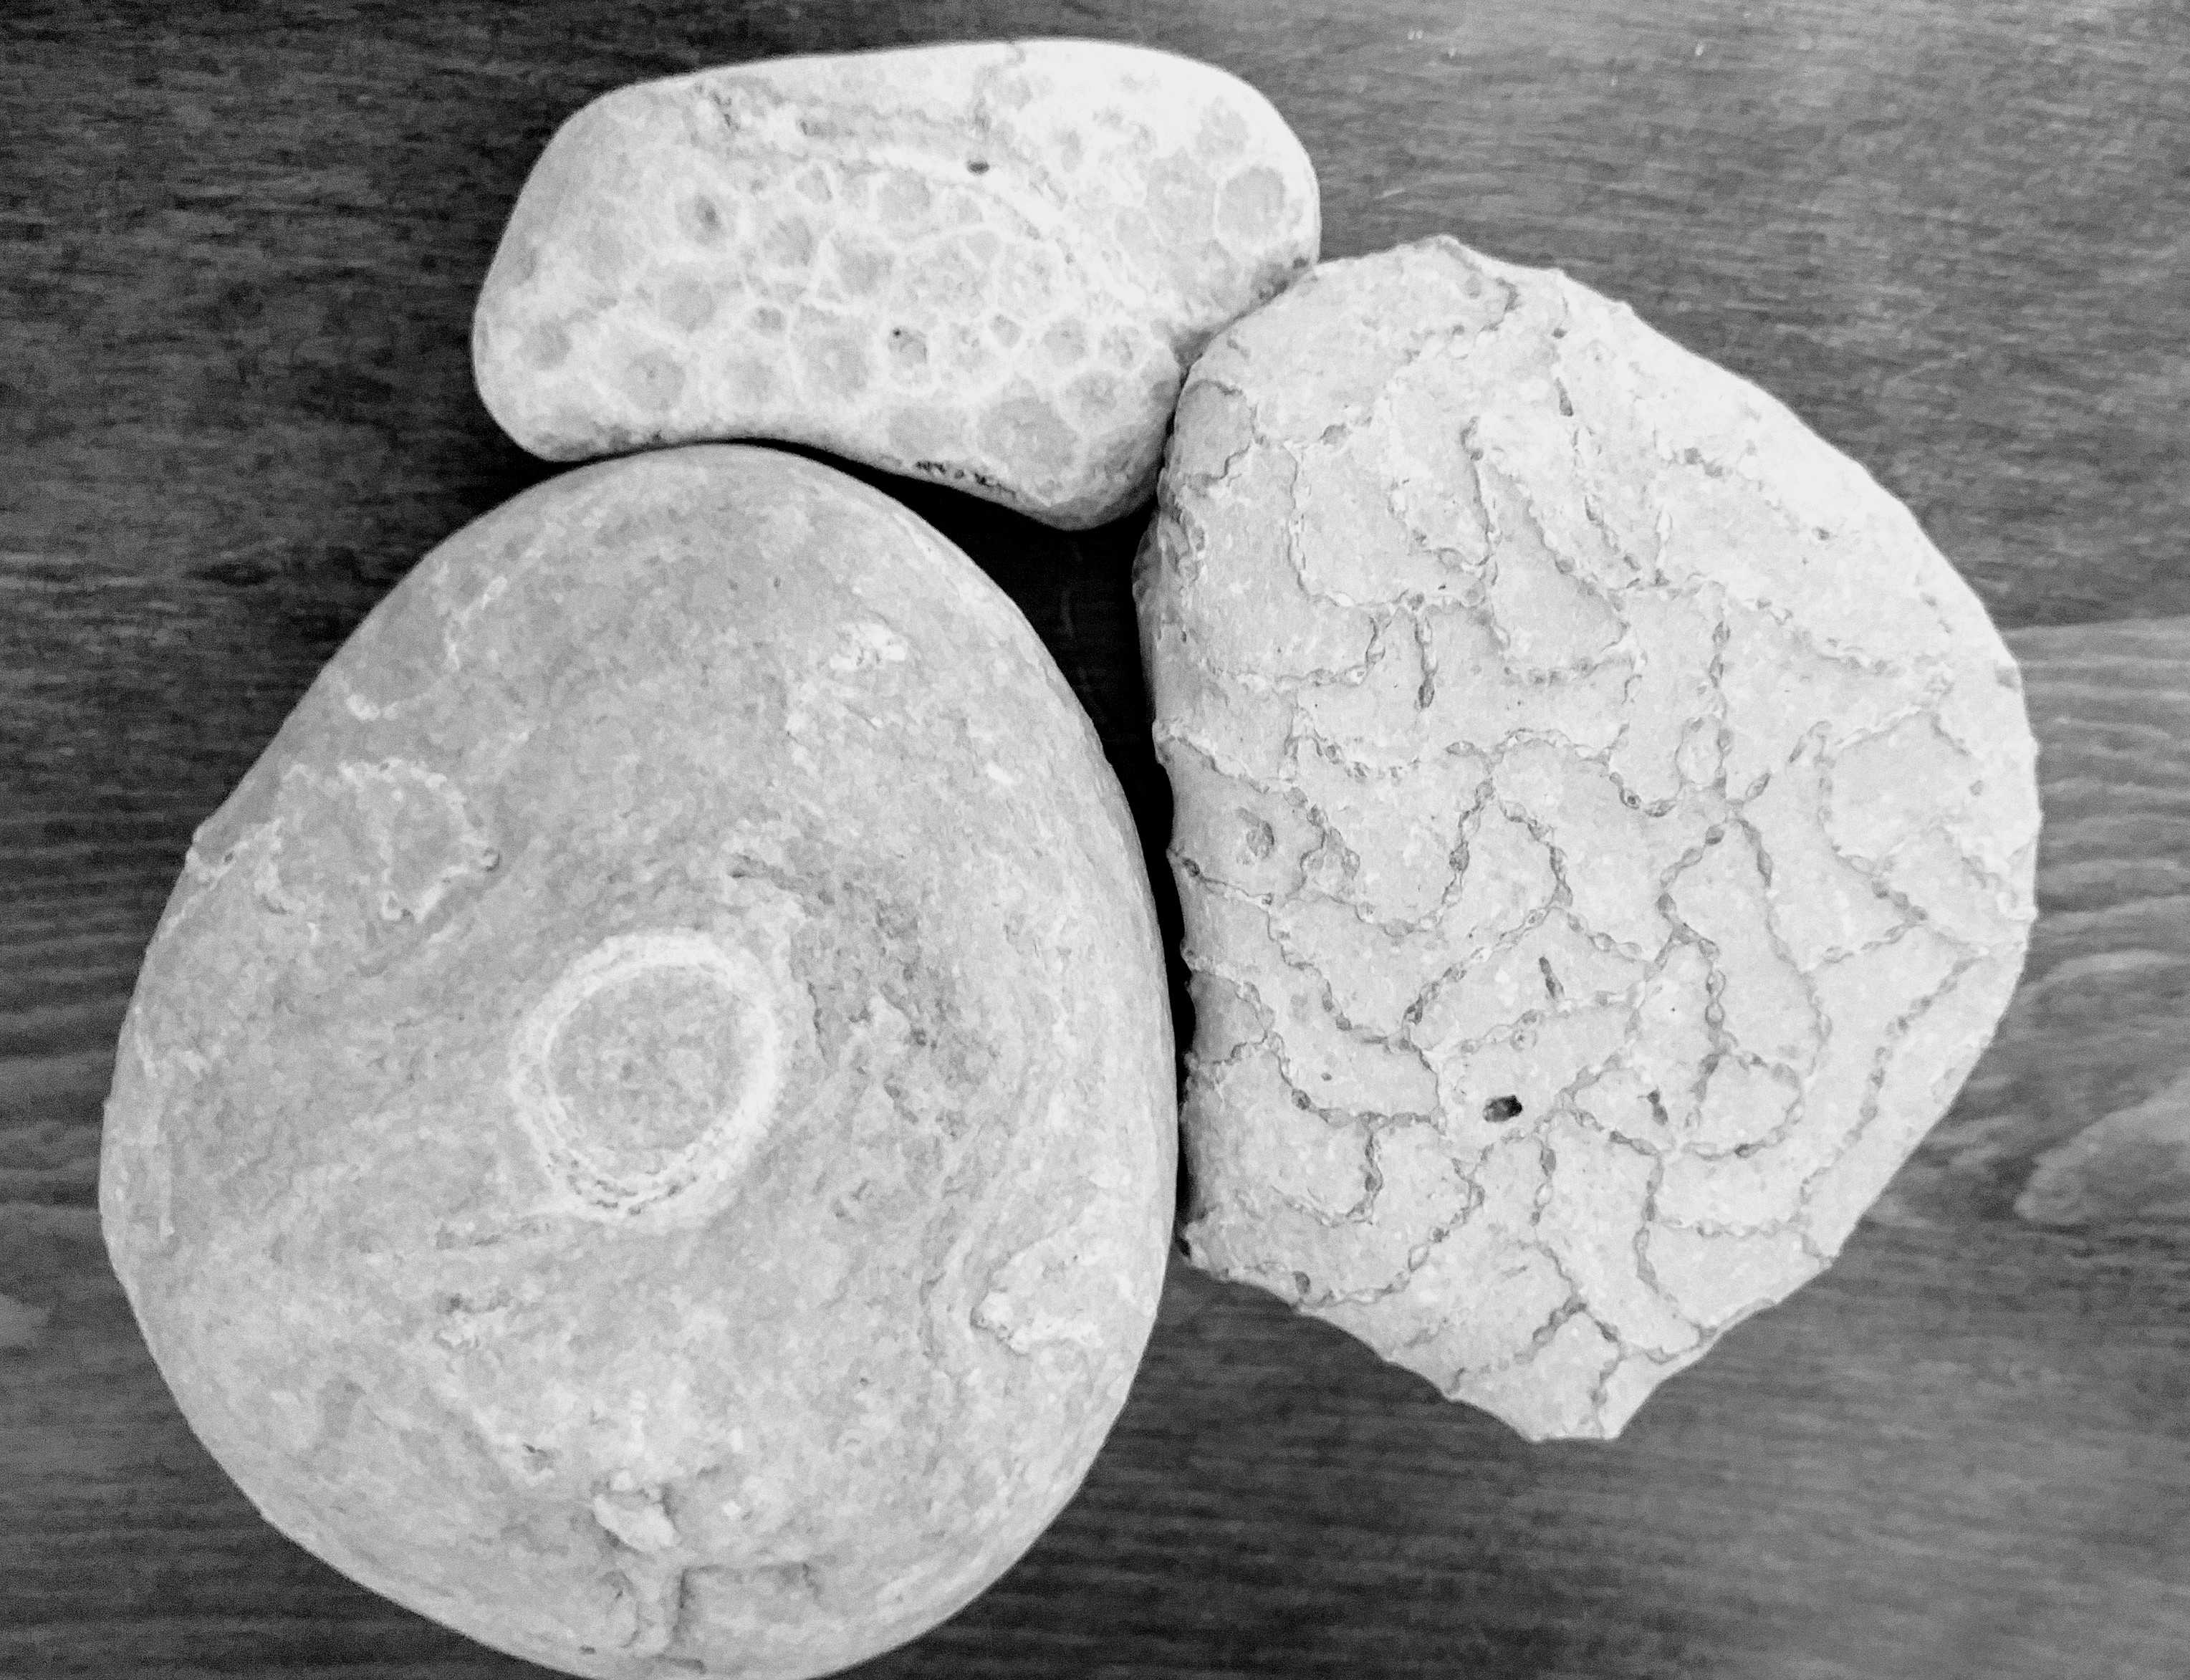 Three rocks: a Petosky stone, fossilized halysite coral, and a stromatalite.